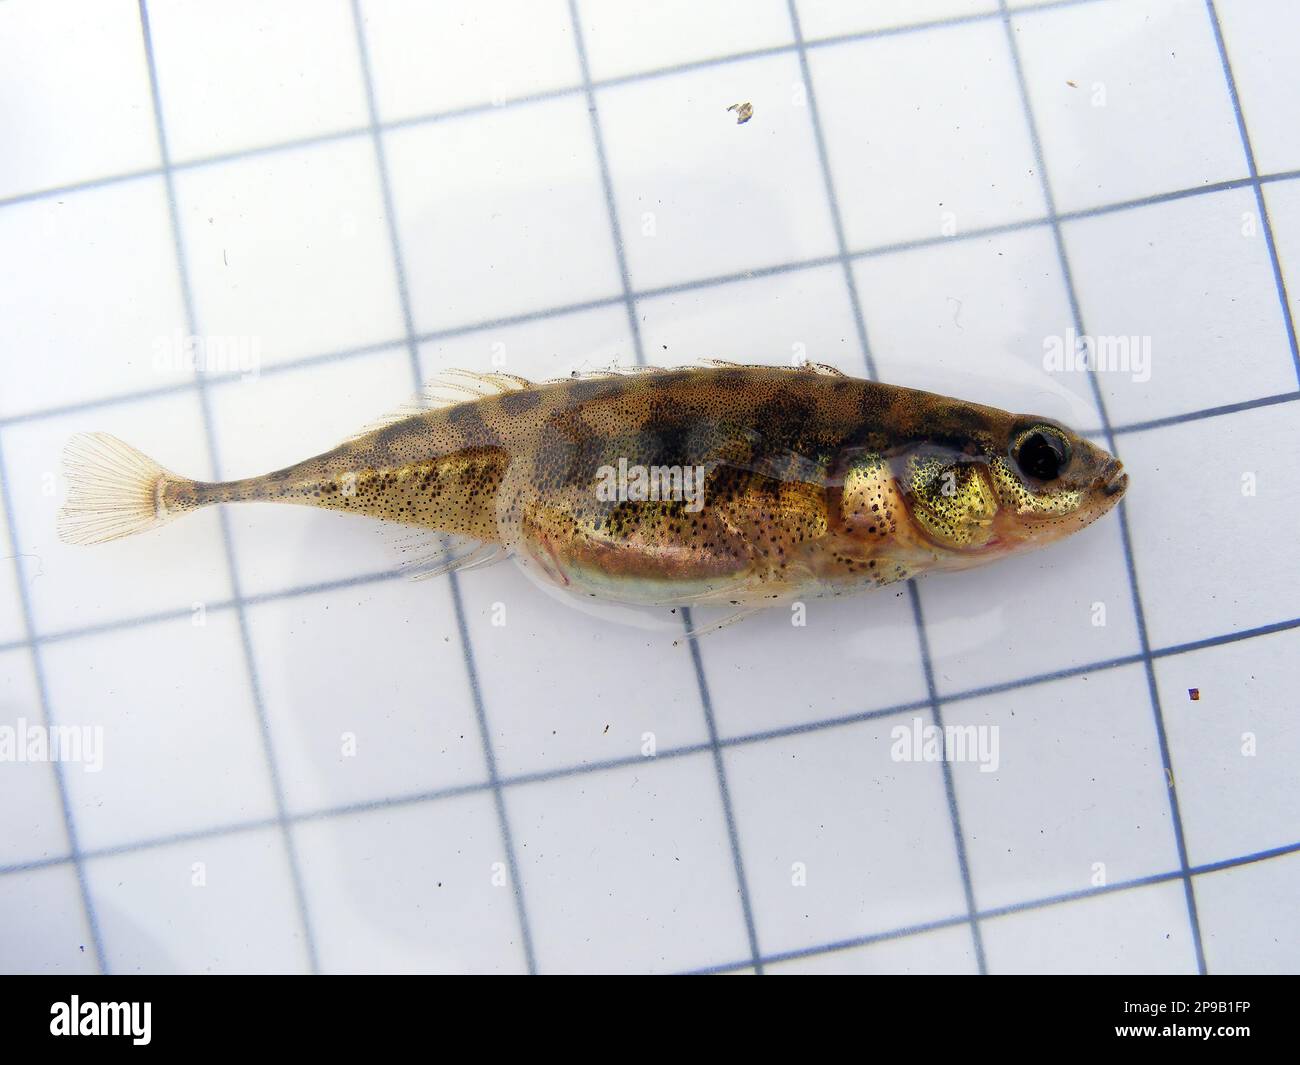 A fish The three-spined stickleback (Gasterosteus aculeatus) on the background of a 5 mm measurement grid. Ichthyology research. Stock Photo